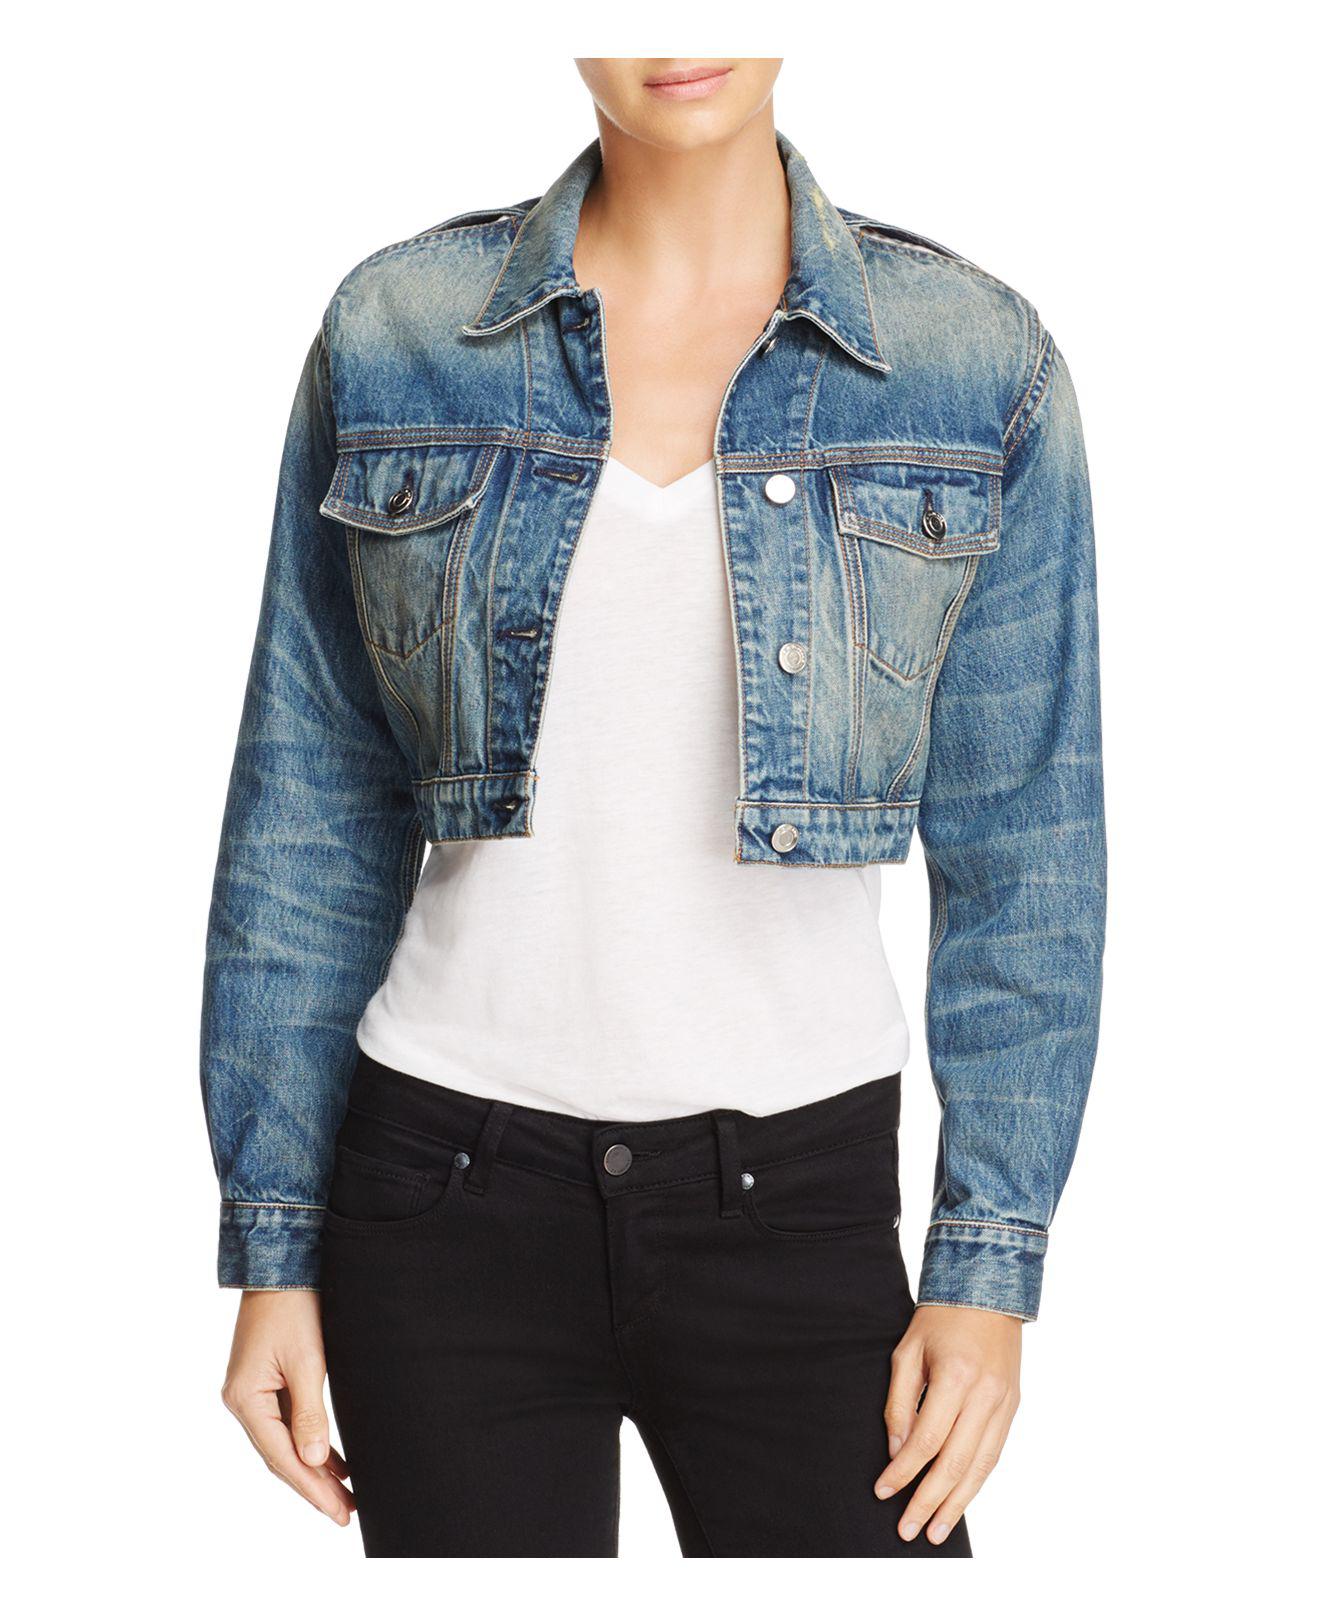 IRO Kiss Cutout Cropped Denim Jacket in Blue Washed (Blue) - Lyst